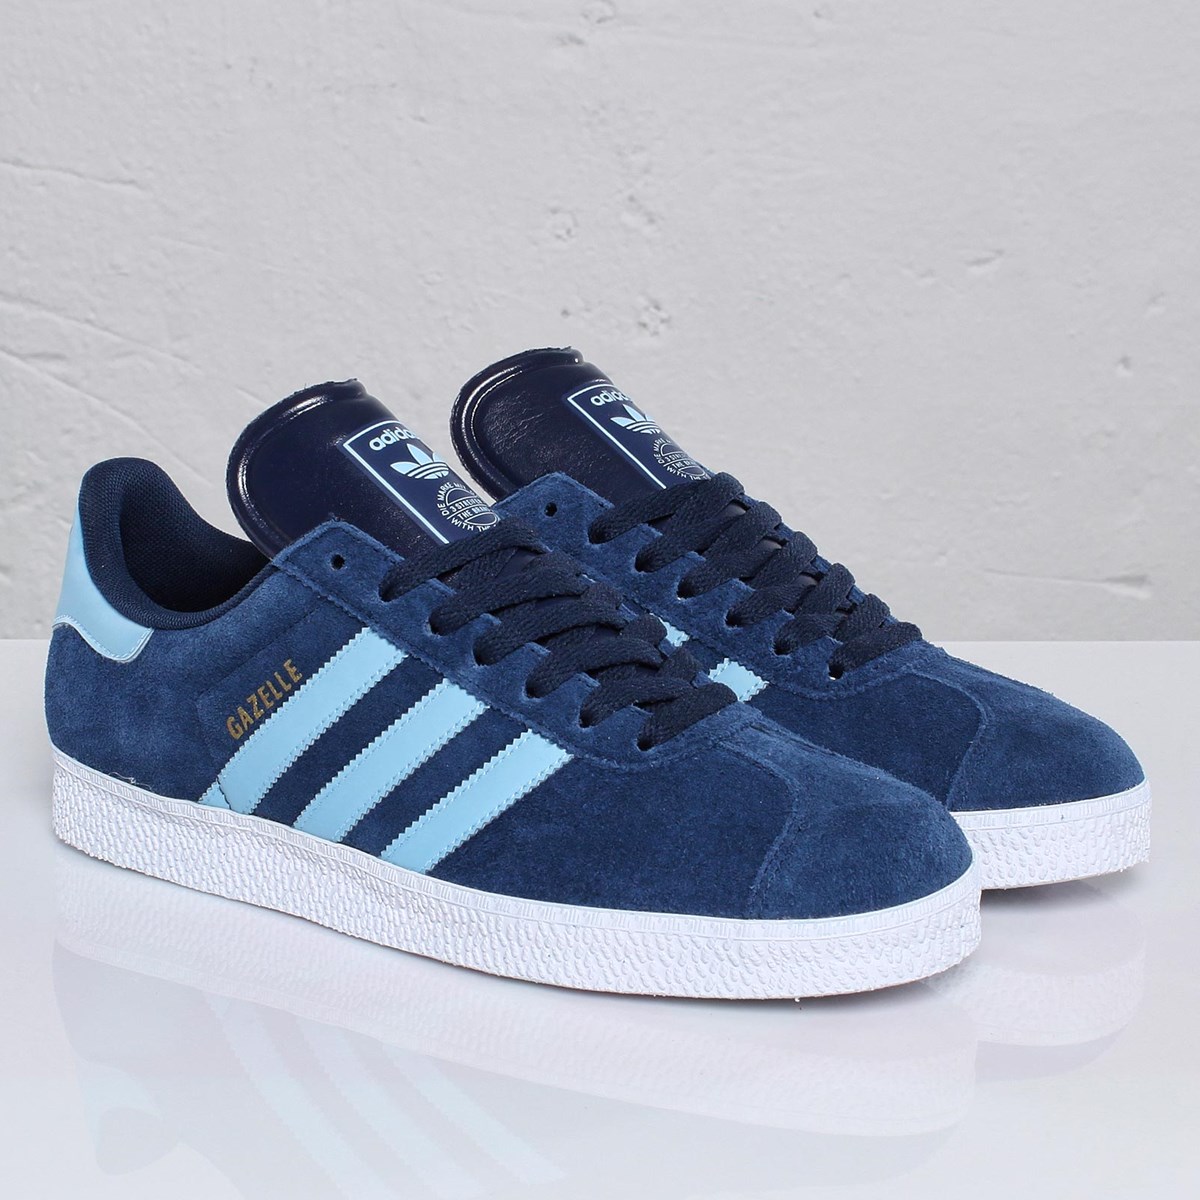 priscilla page on Twitter: "thinking about Skyfall and how I've wanted these Adidas 2 sneakers (in dark indigo with Argentina blue stripes) forever that Bond wears in the film. never